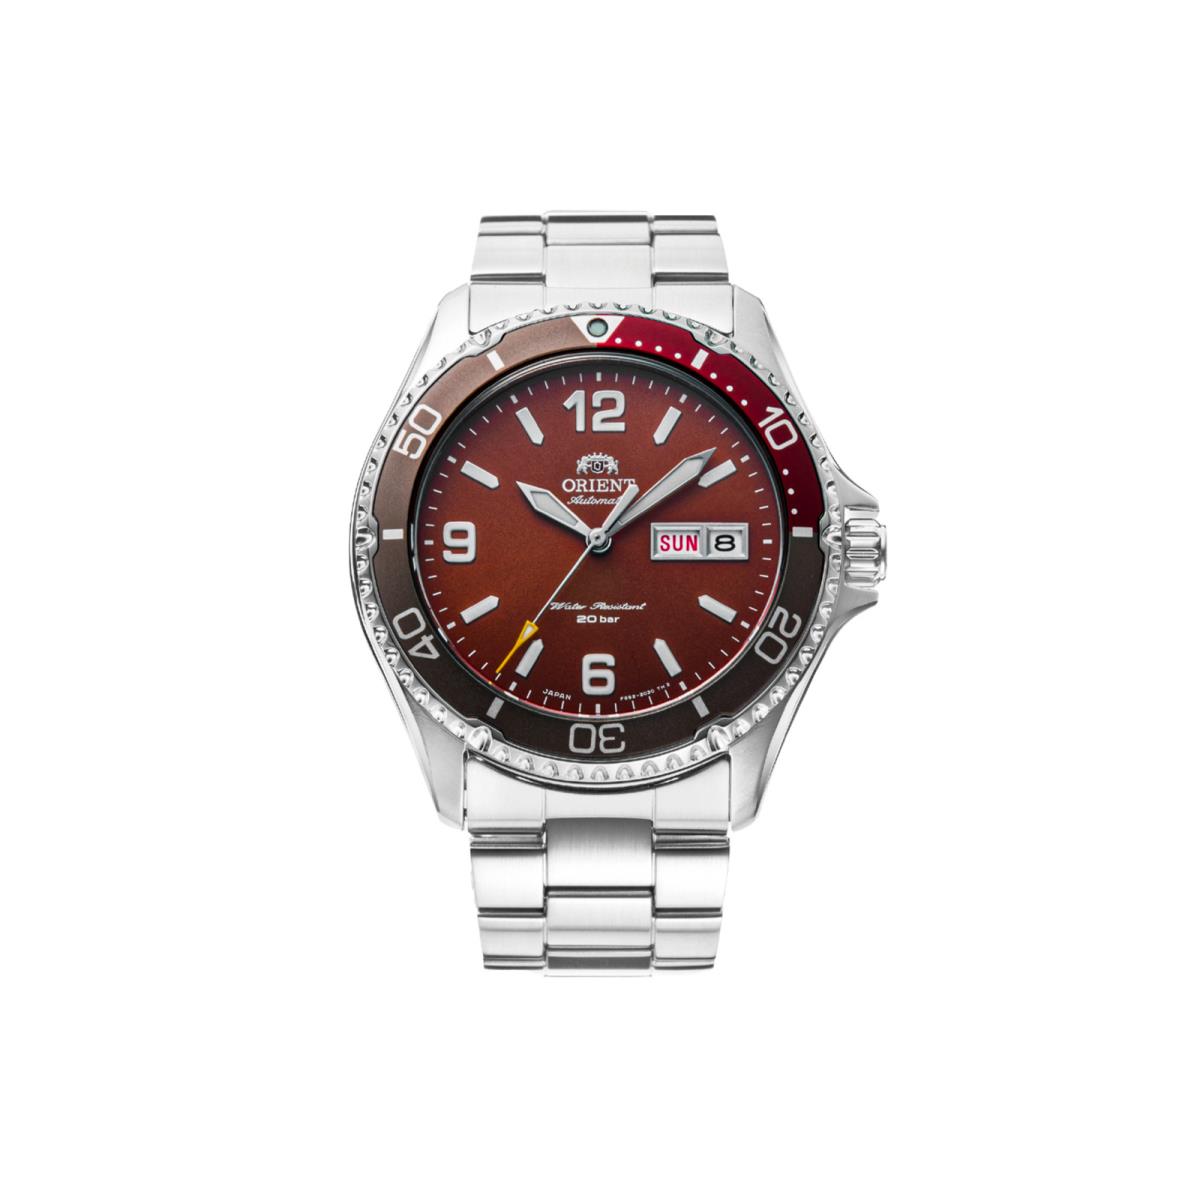 Orient Mako-3 Japanese Automatic 200m Diver Watch with Sapphire Crystal Red - RA-AA0820R19B